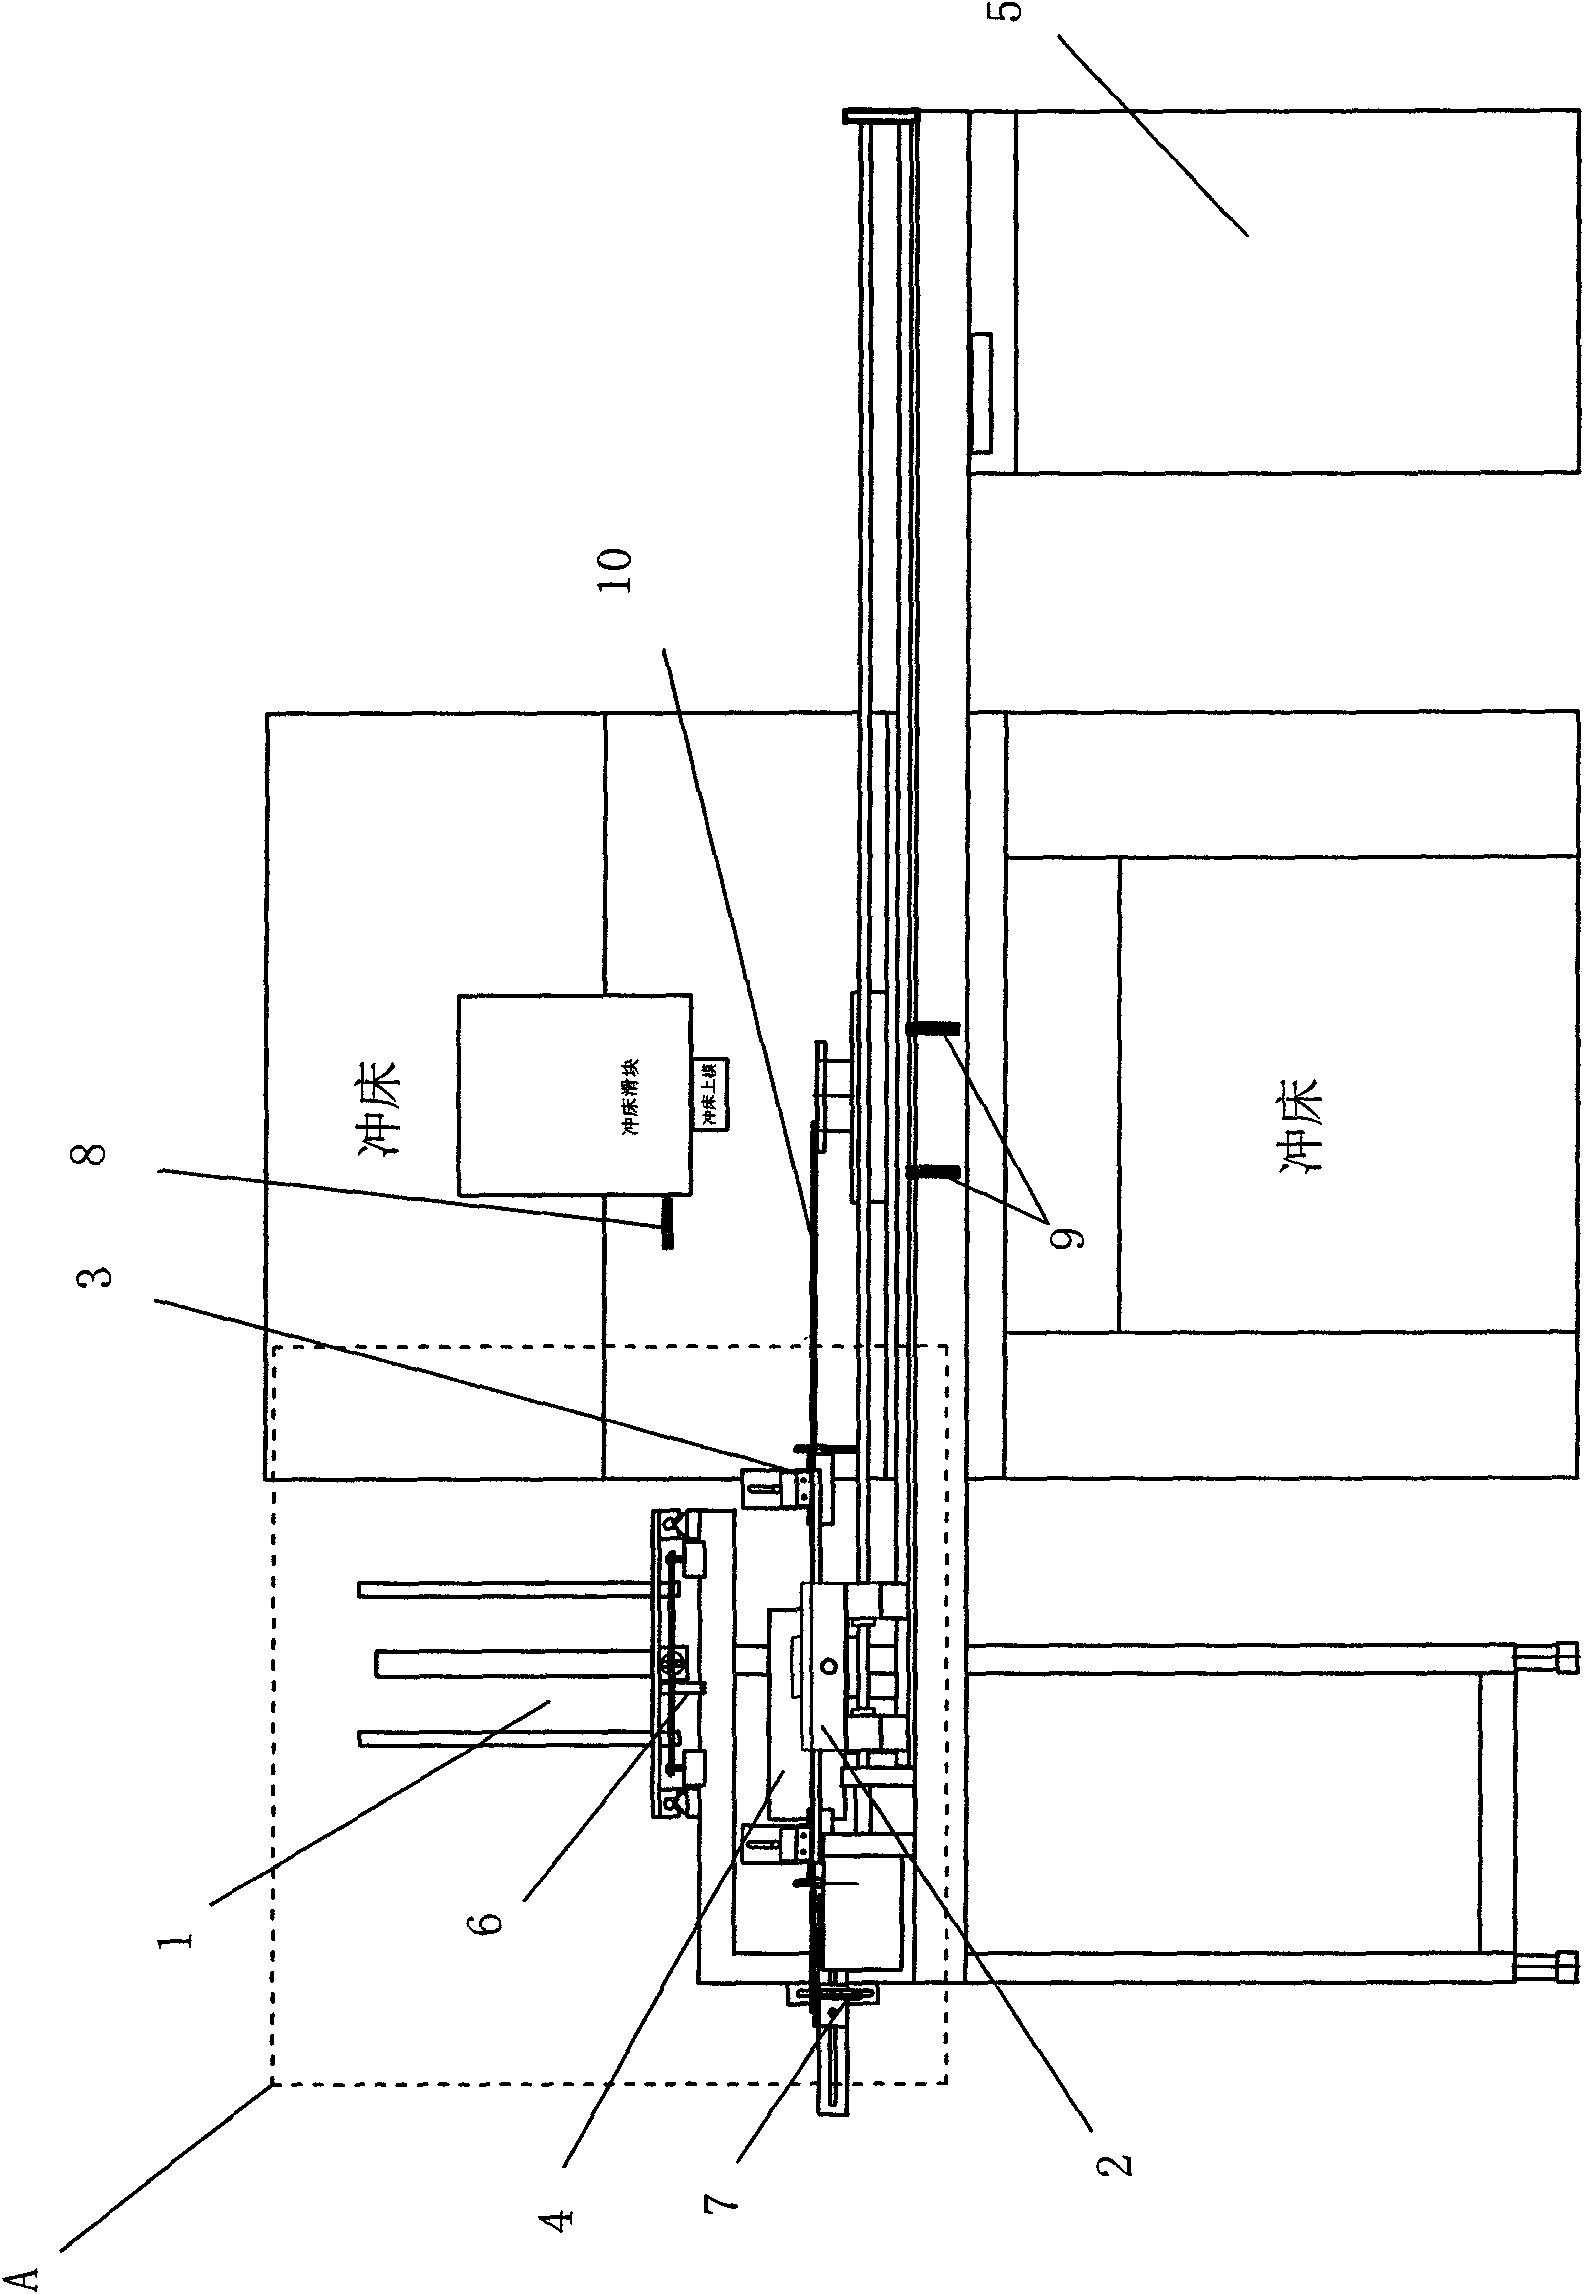 Automatic material loading, feeding and unloading equipment for bar stock blanking and method thereof